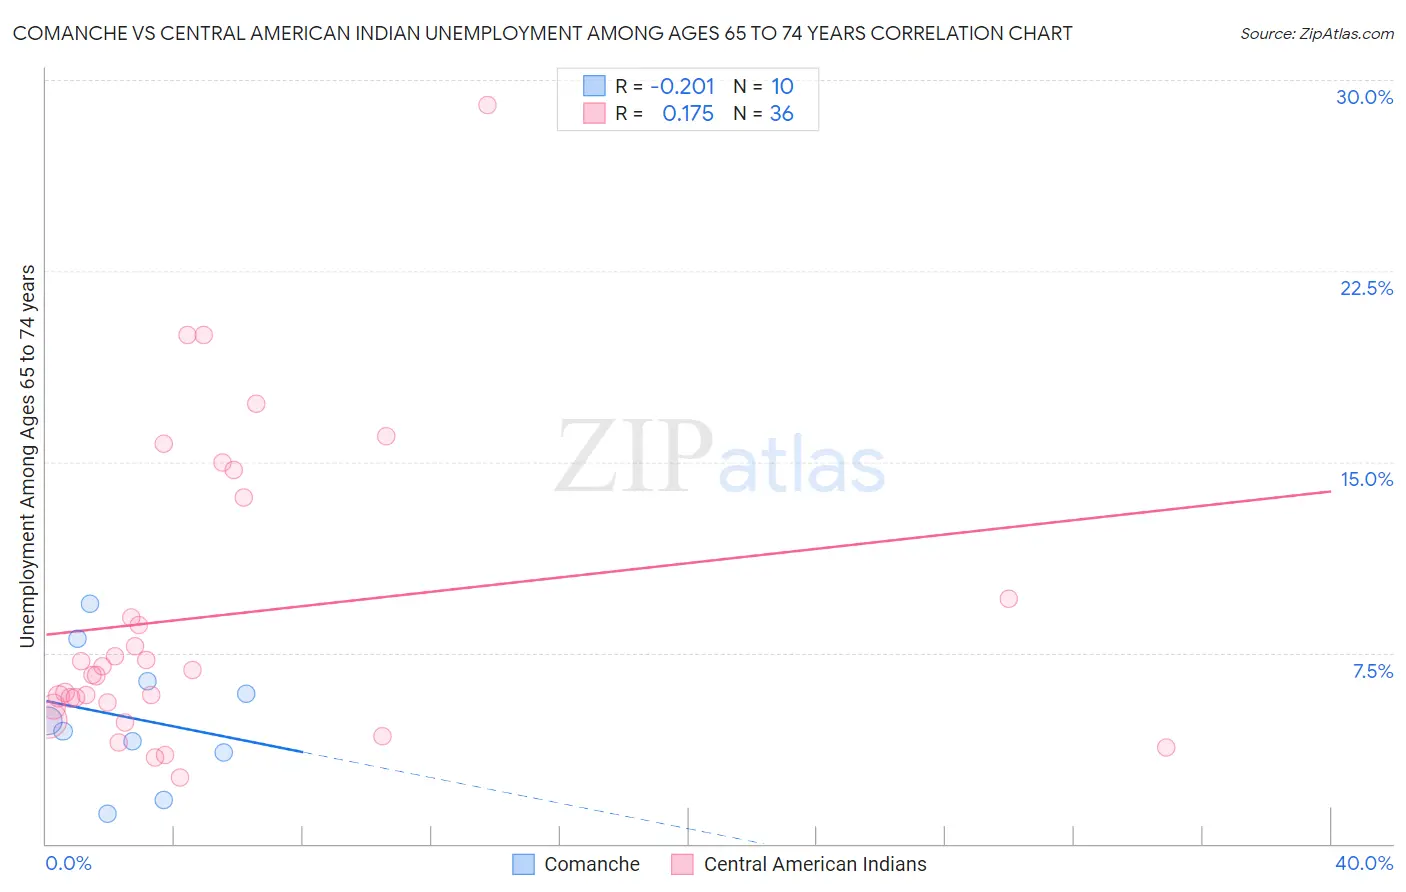 Comanche vs Central American Indian Unemployment Among Ages 65 to 74 years